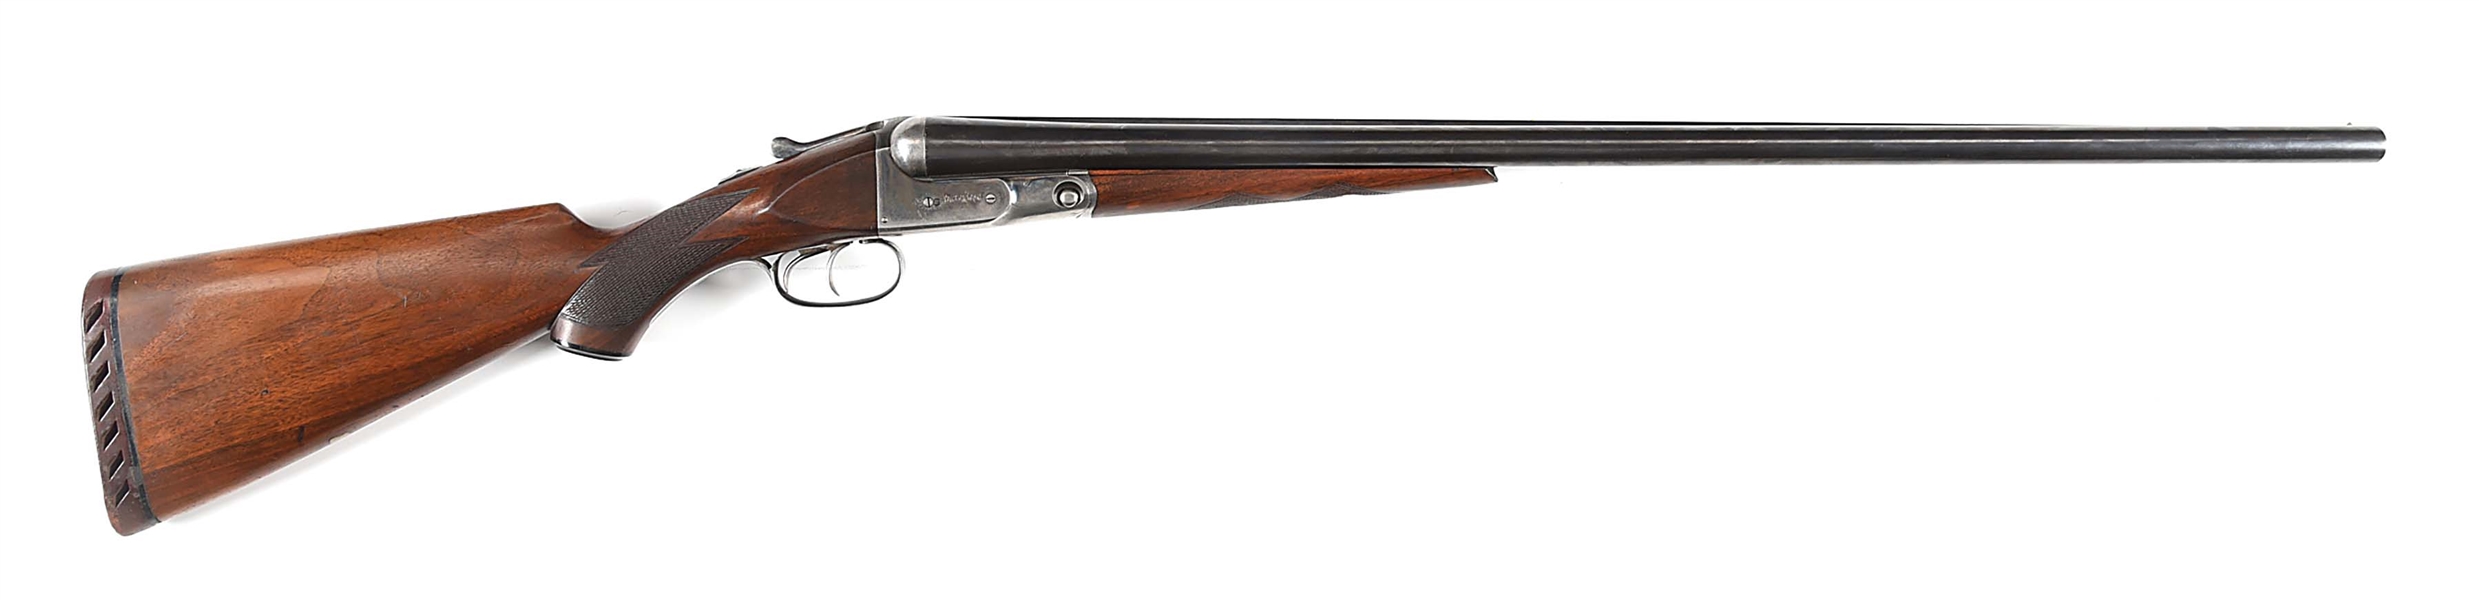 (C) PARKER VHE 12 BORE SIDE BY SIDE SHOTGUN WITH CASE.